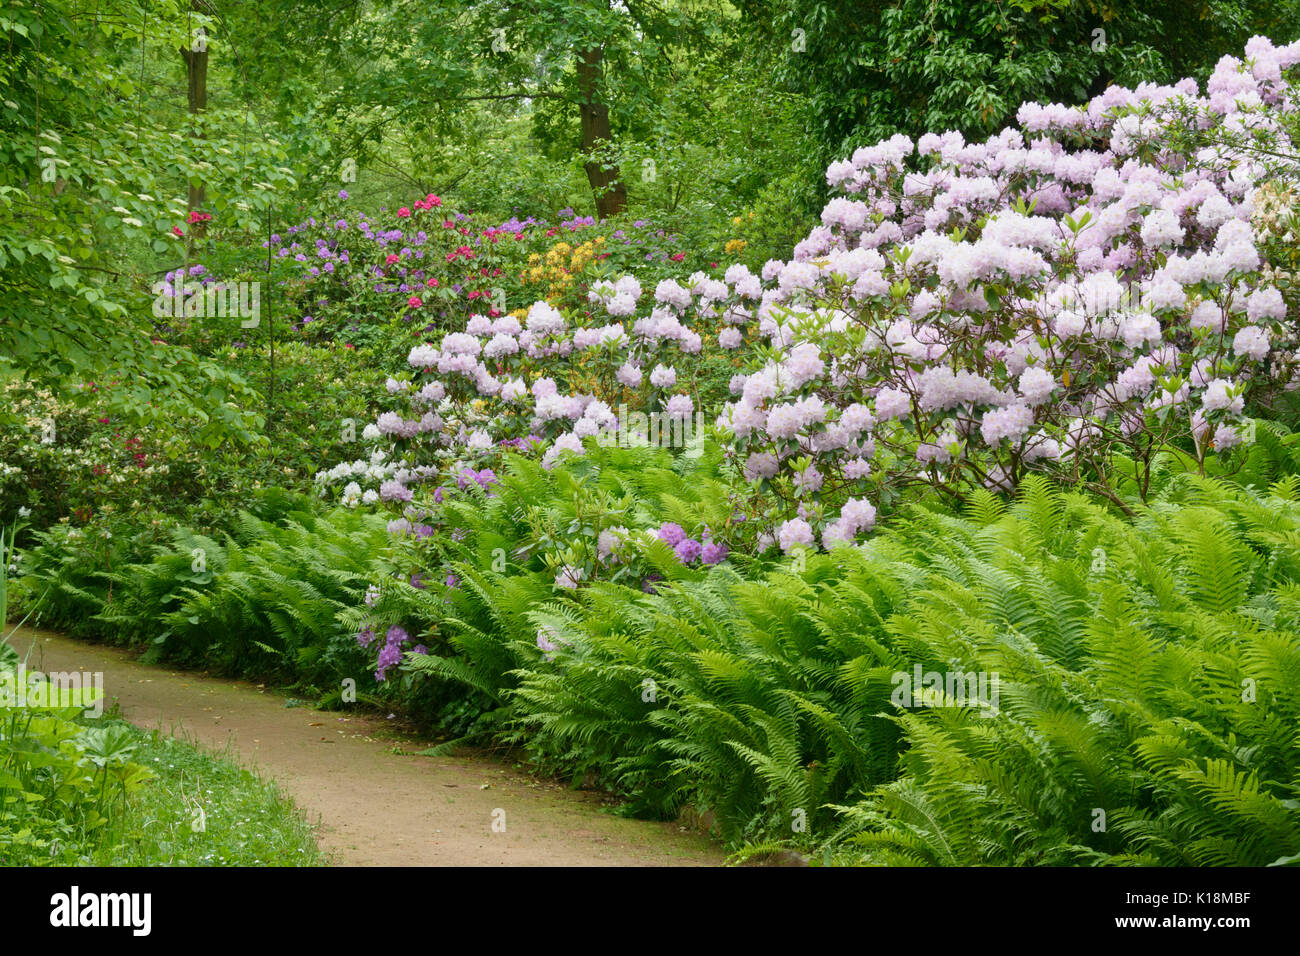 Rhododendrons (Rhododendron) and ostrich fern (Matteuccia struthiopteris) Stock Photo